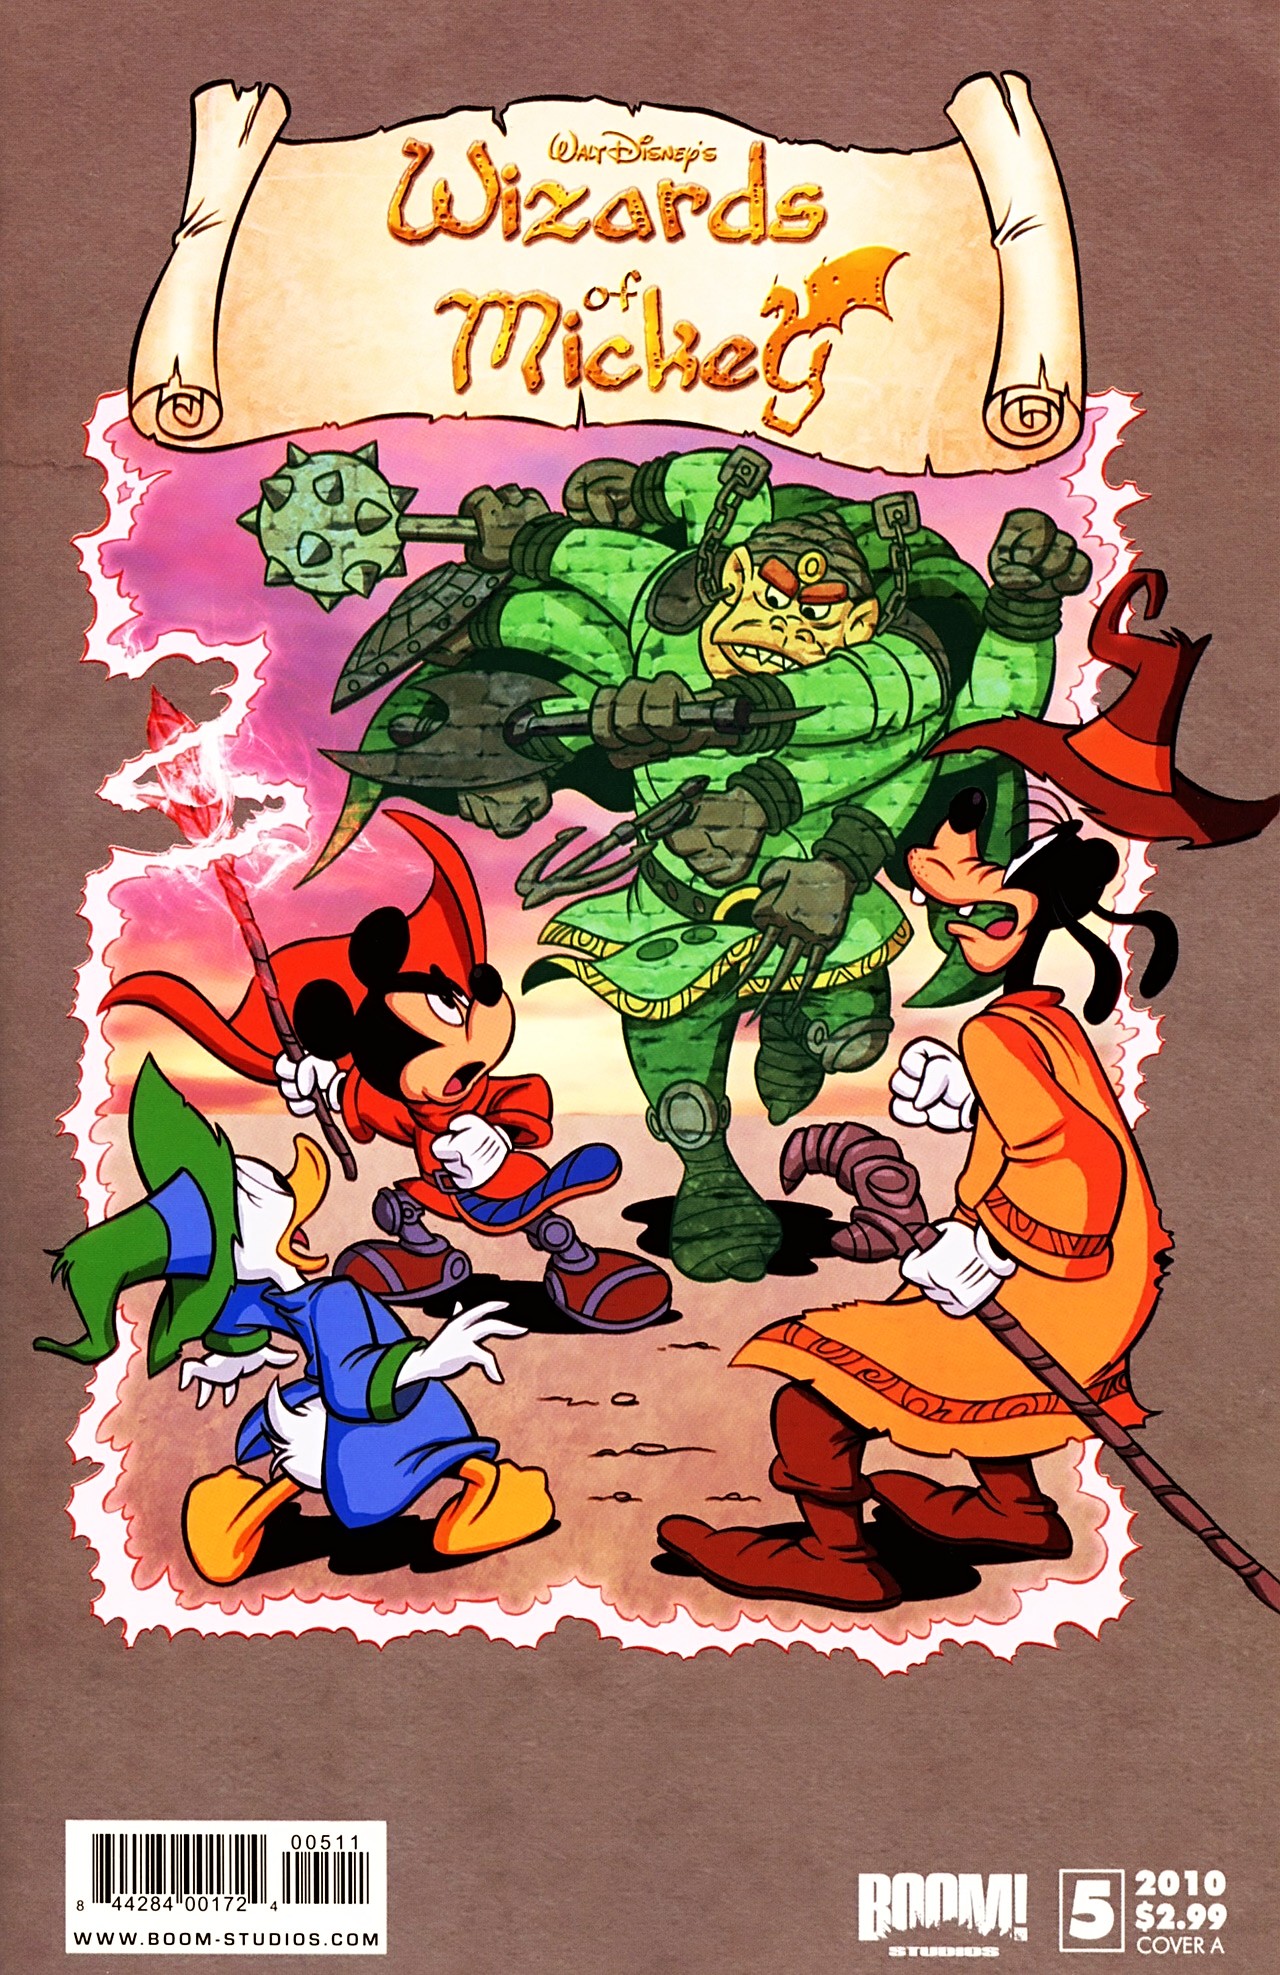 Read online Wizards of Mickey comic -  Issue #5 - 1